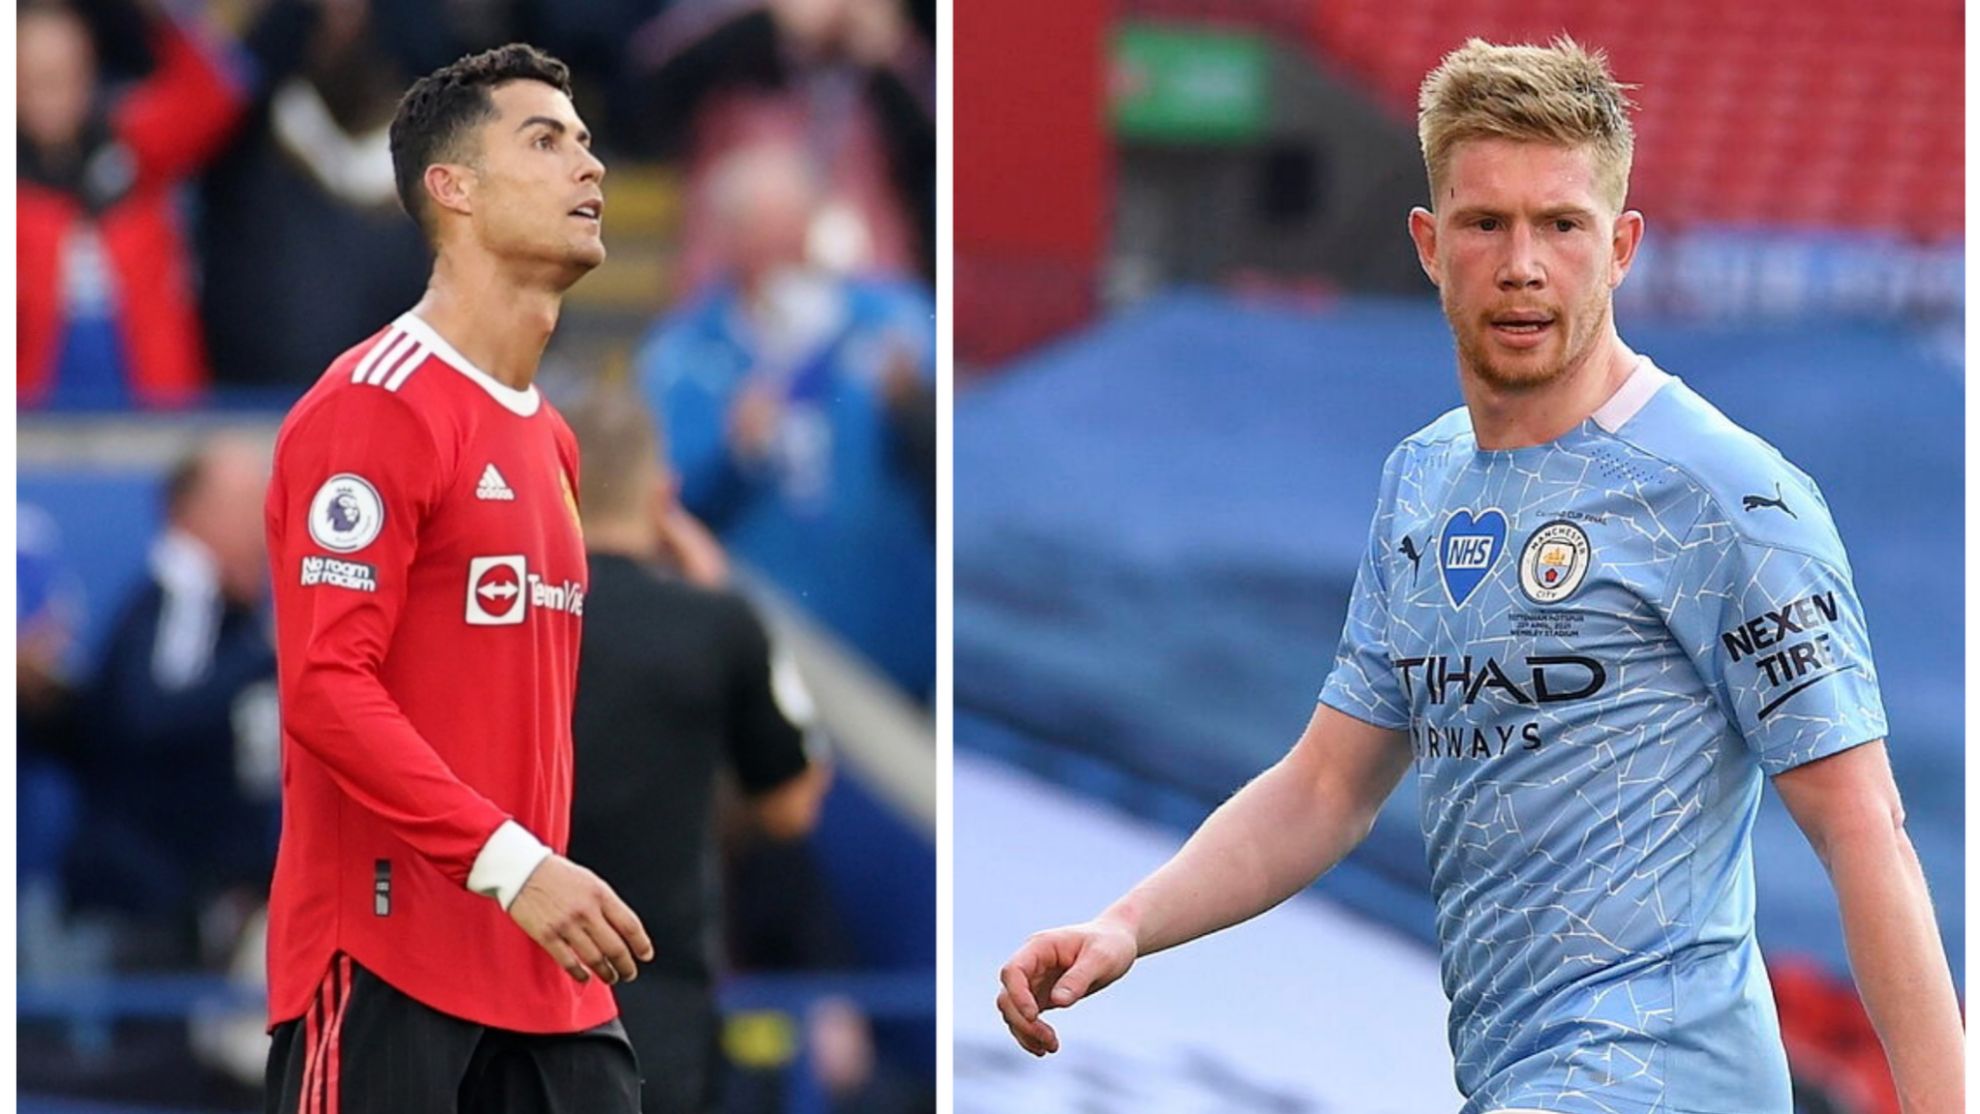 Manchester United vs Manchester City LIVE: Pep Guardiola's side travel to Old Trafford with Solskjaer under-pressure, Man Utd vs Man City live streaming, follow for live updates